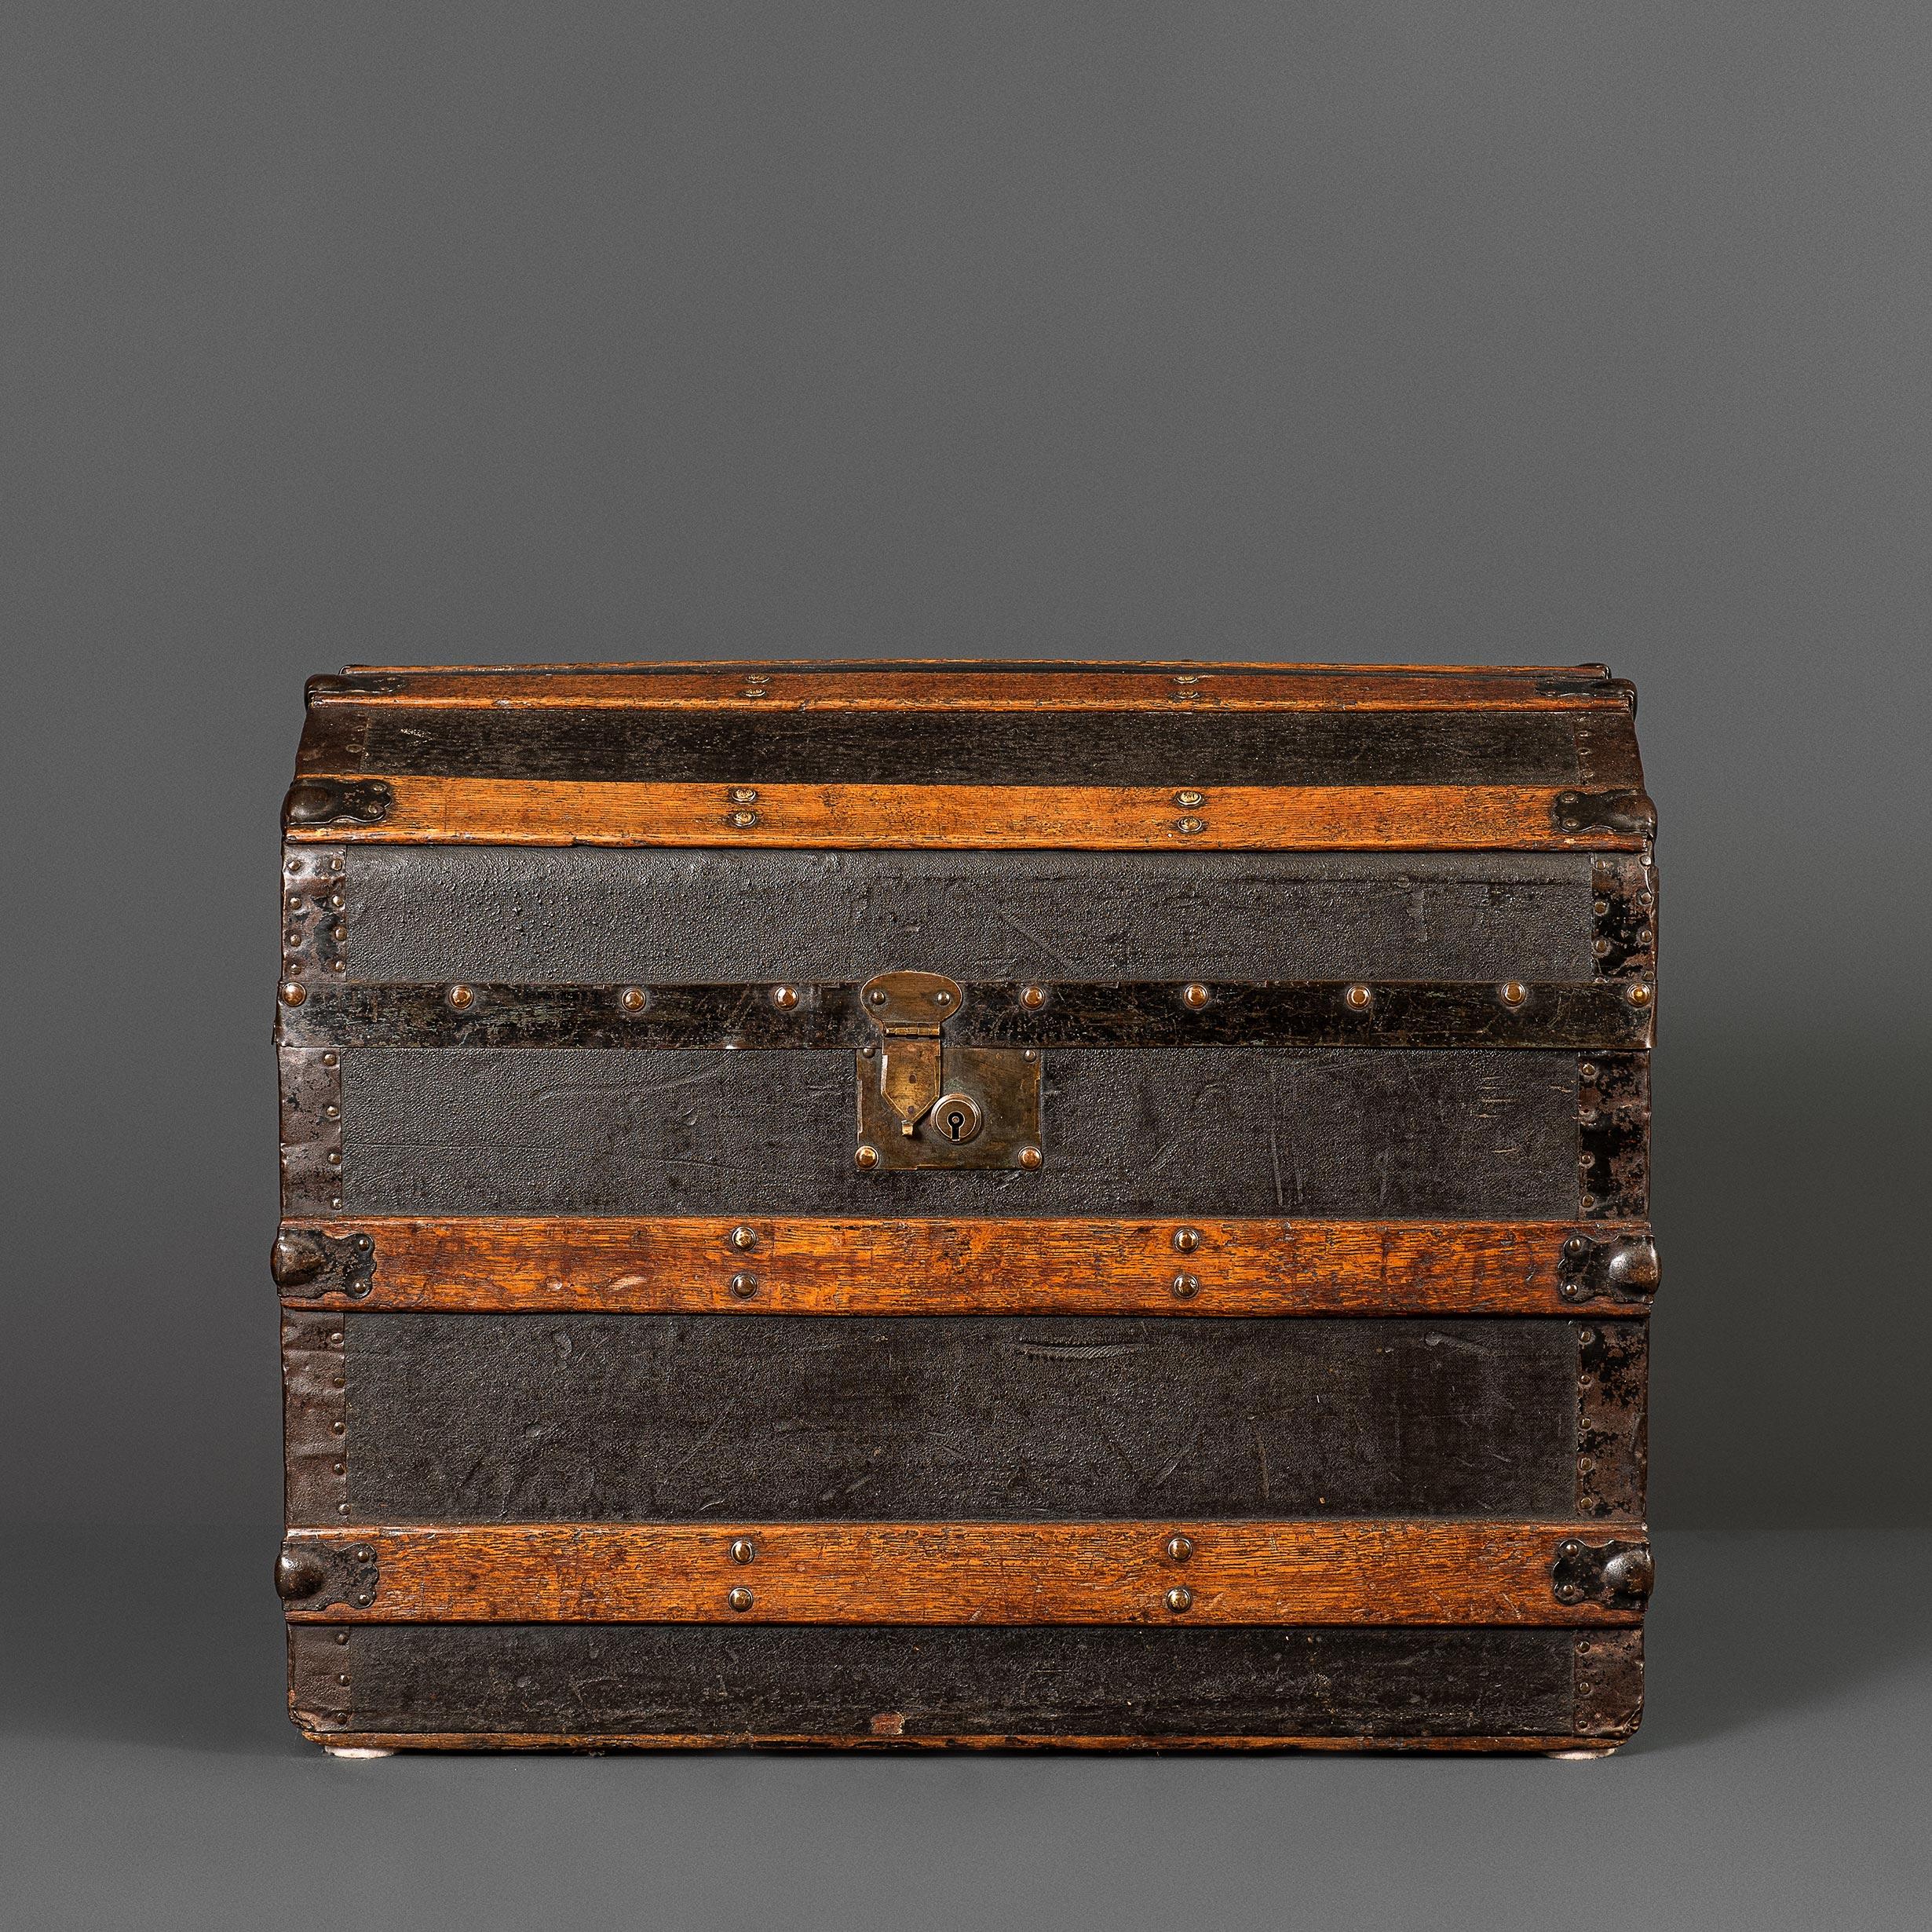 A dome topped English trunk made from oak and pine with brass fittings. Wonderful colouring. Decorative and practical storage piece.